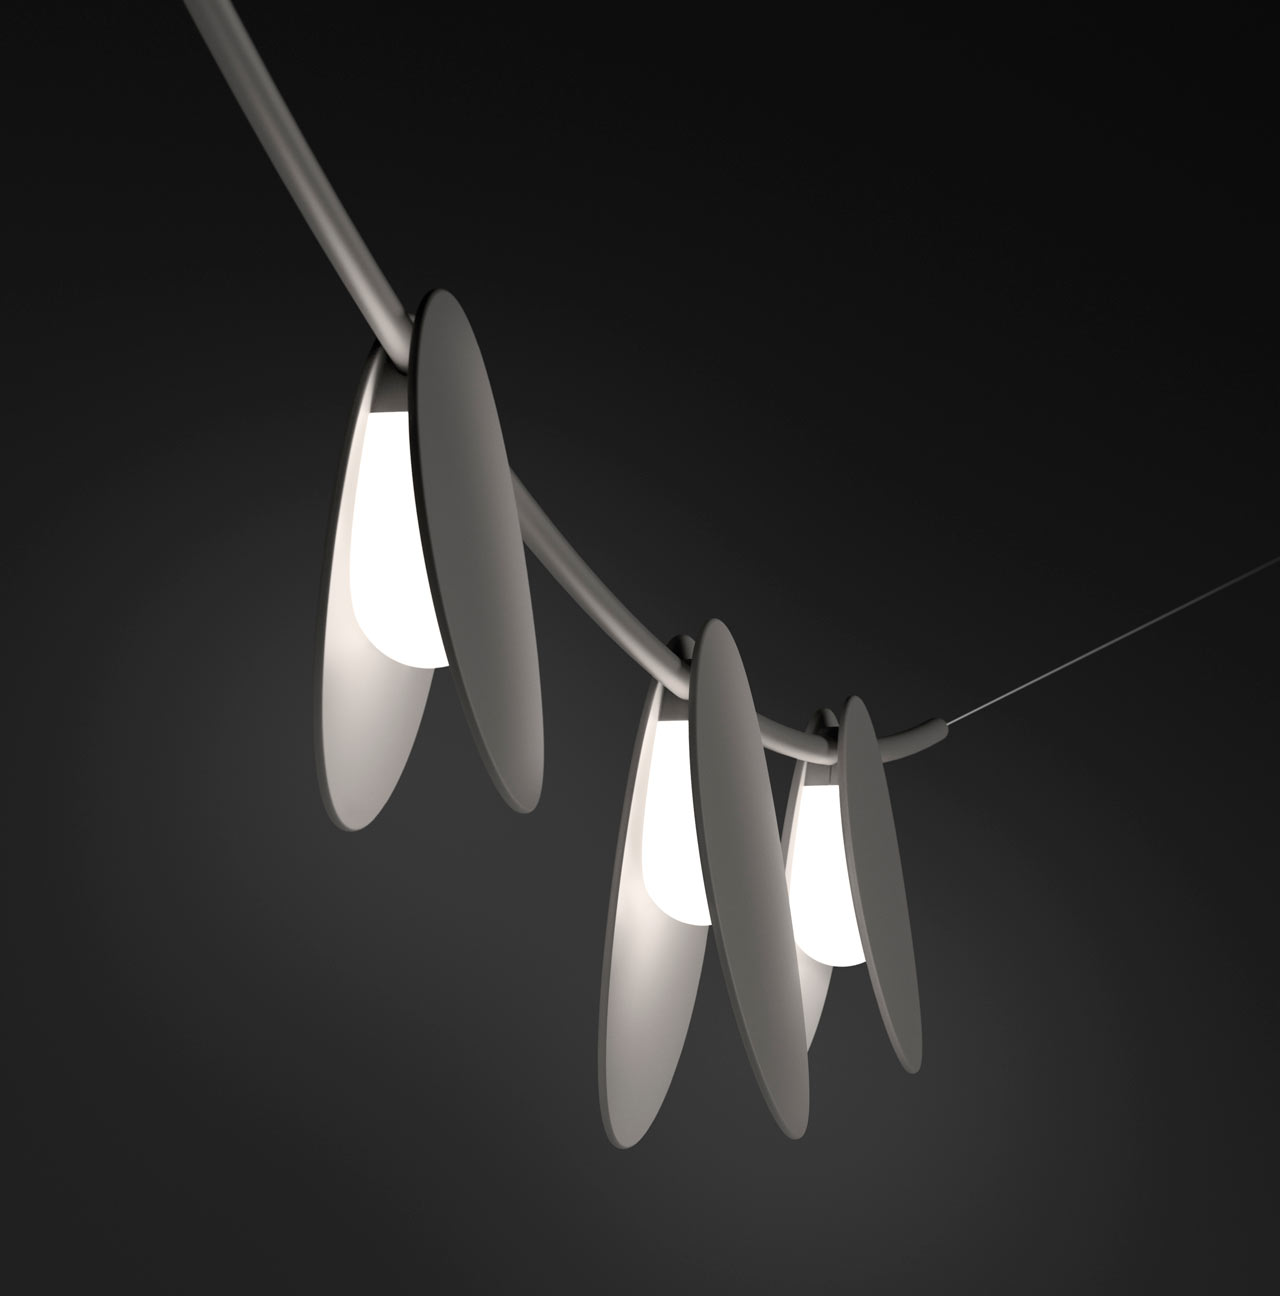 June Outdoor Lighting Collection by Emiliana Design Studio for Vibia